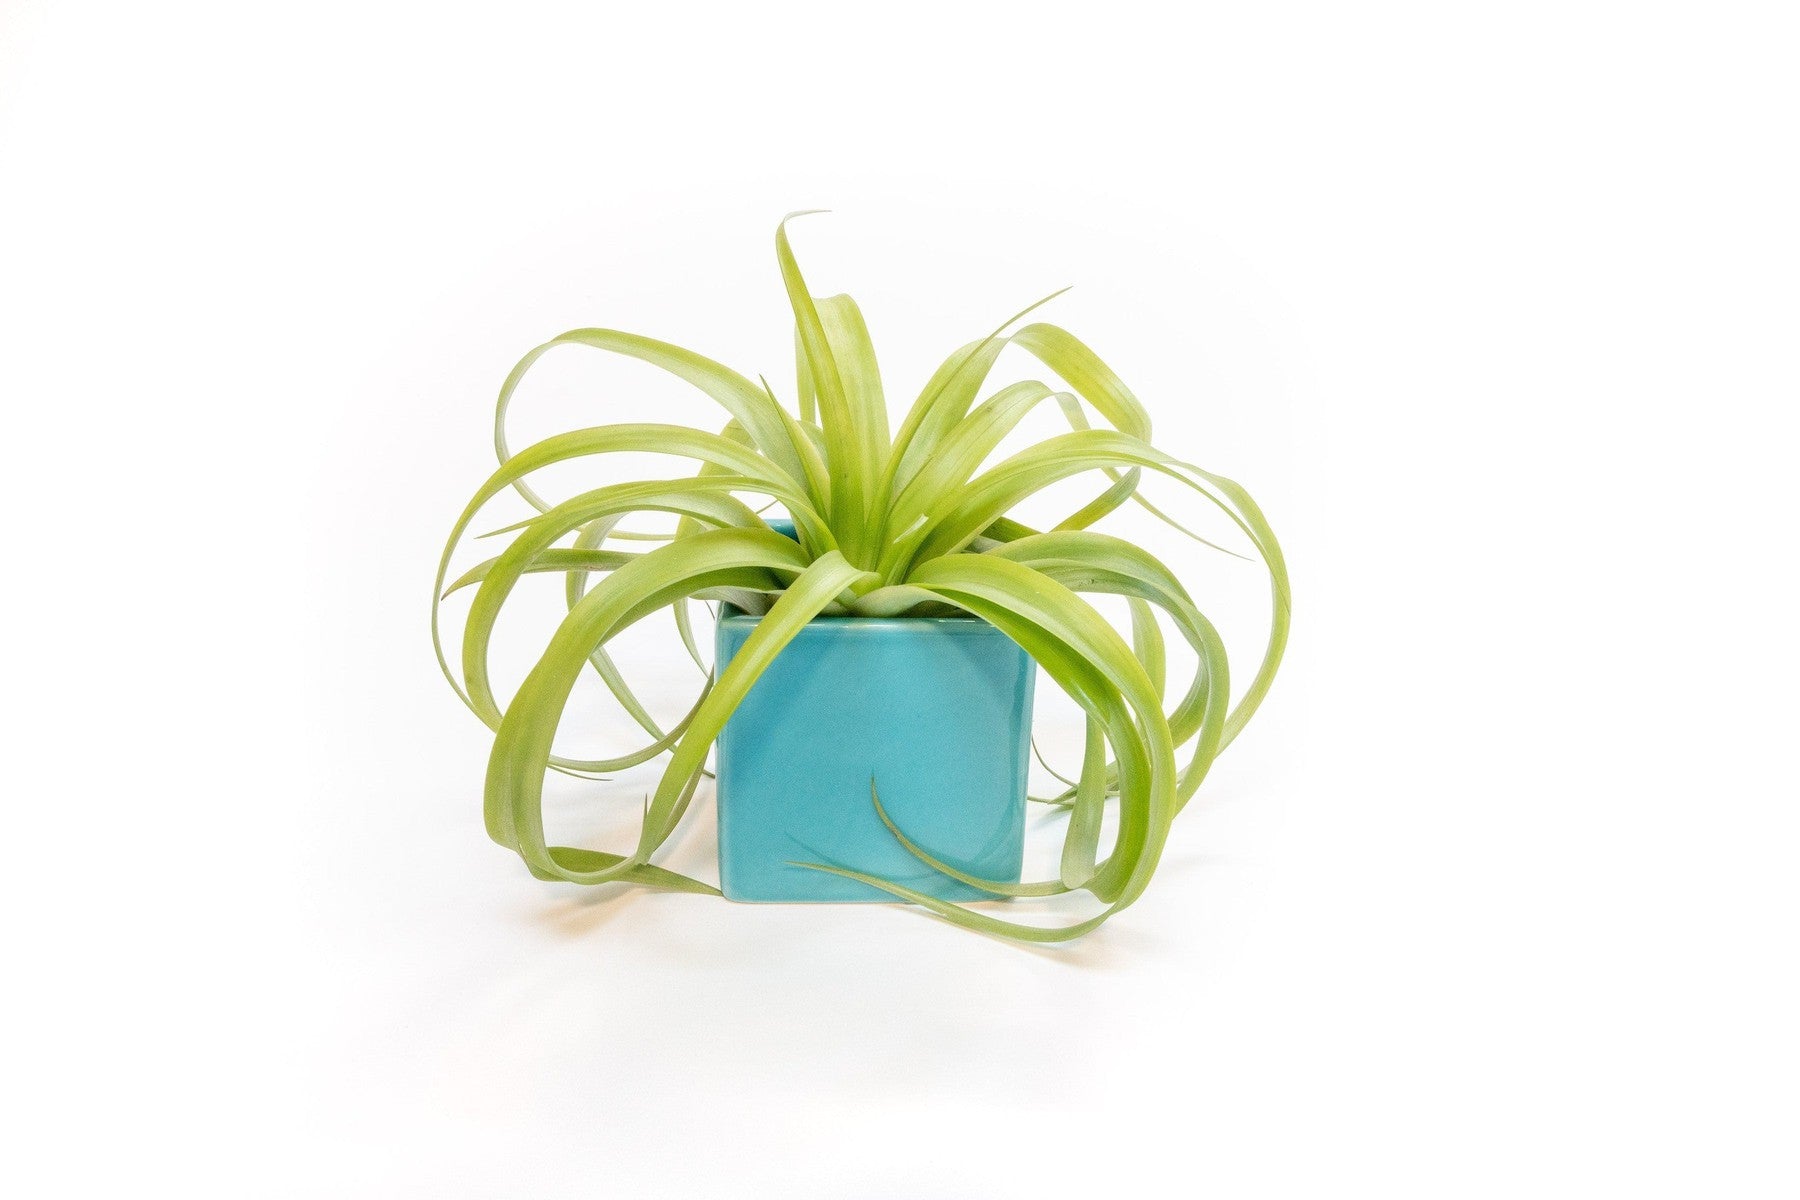 Sky Blue Ceramic Cube Container with Assorted Large Tillandsia Air Plant-The Succulent Source